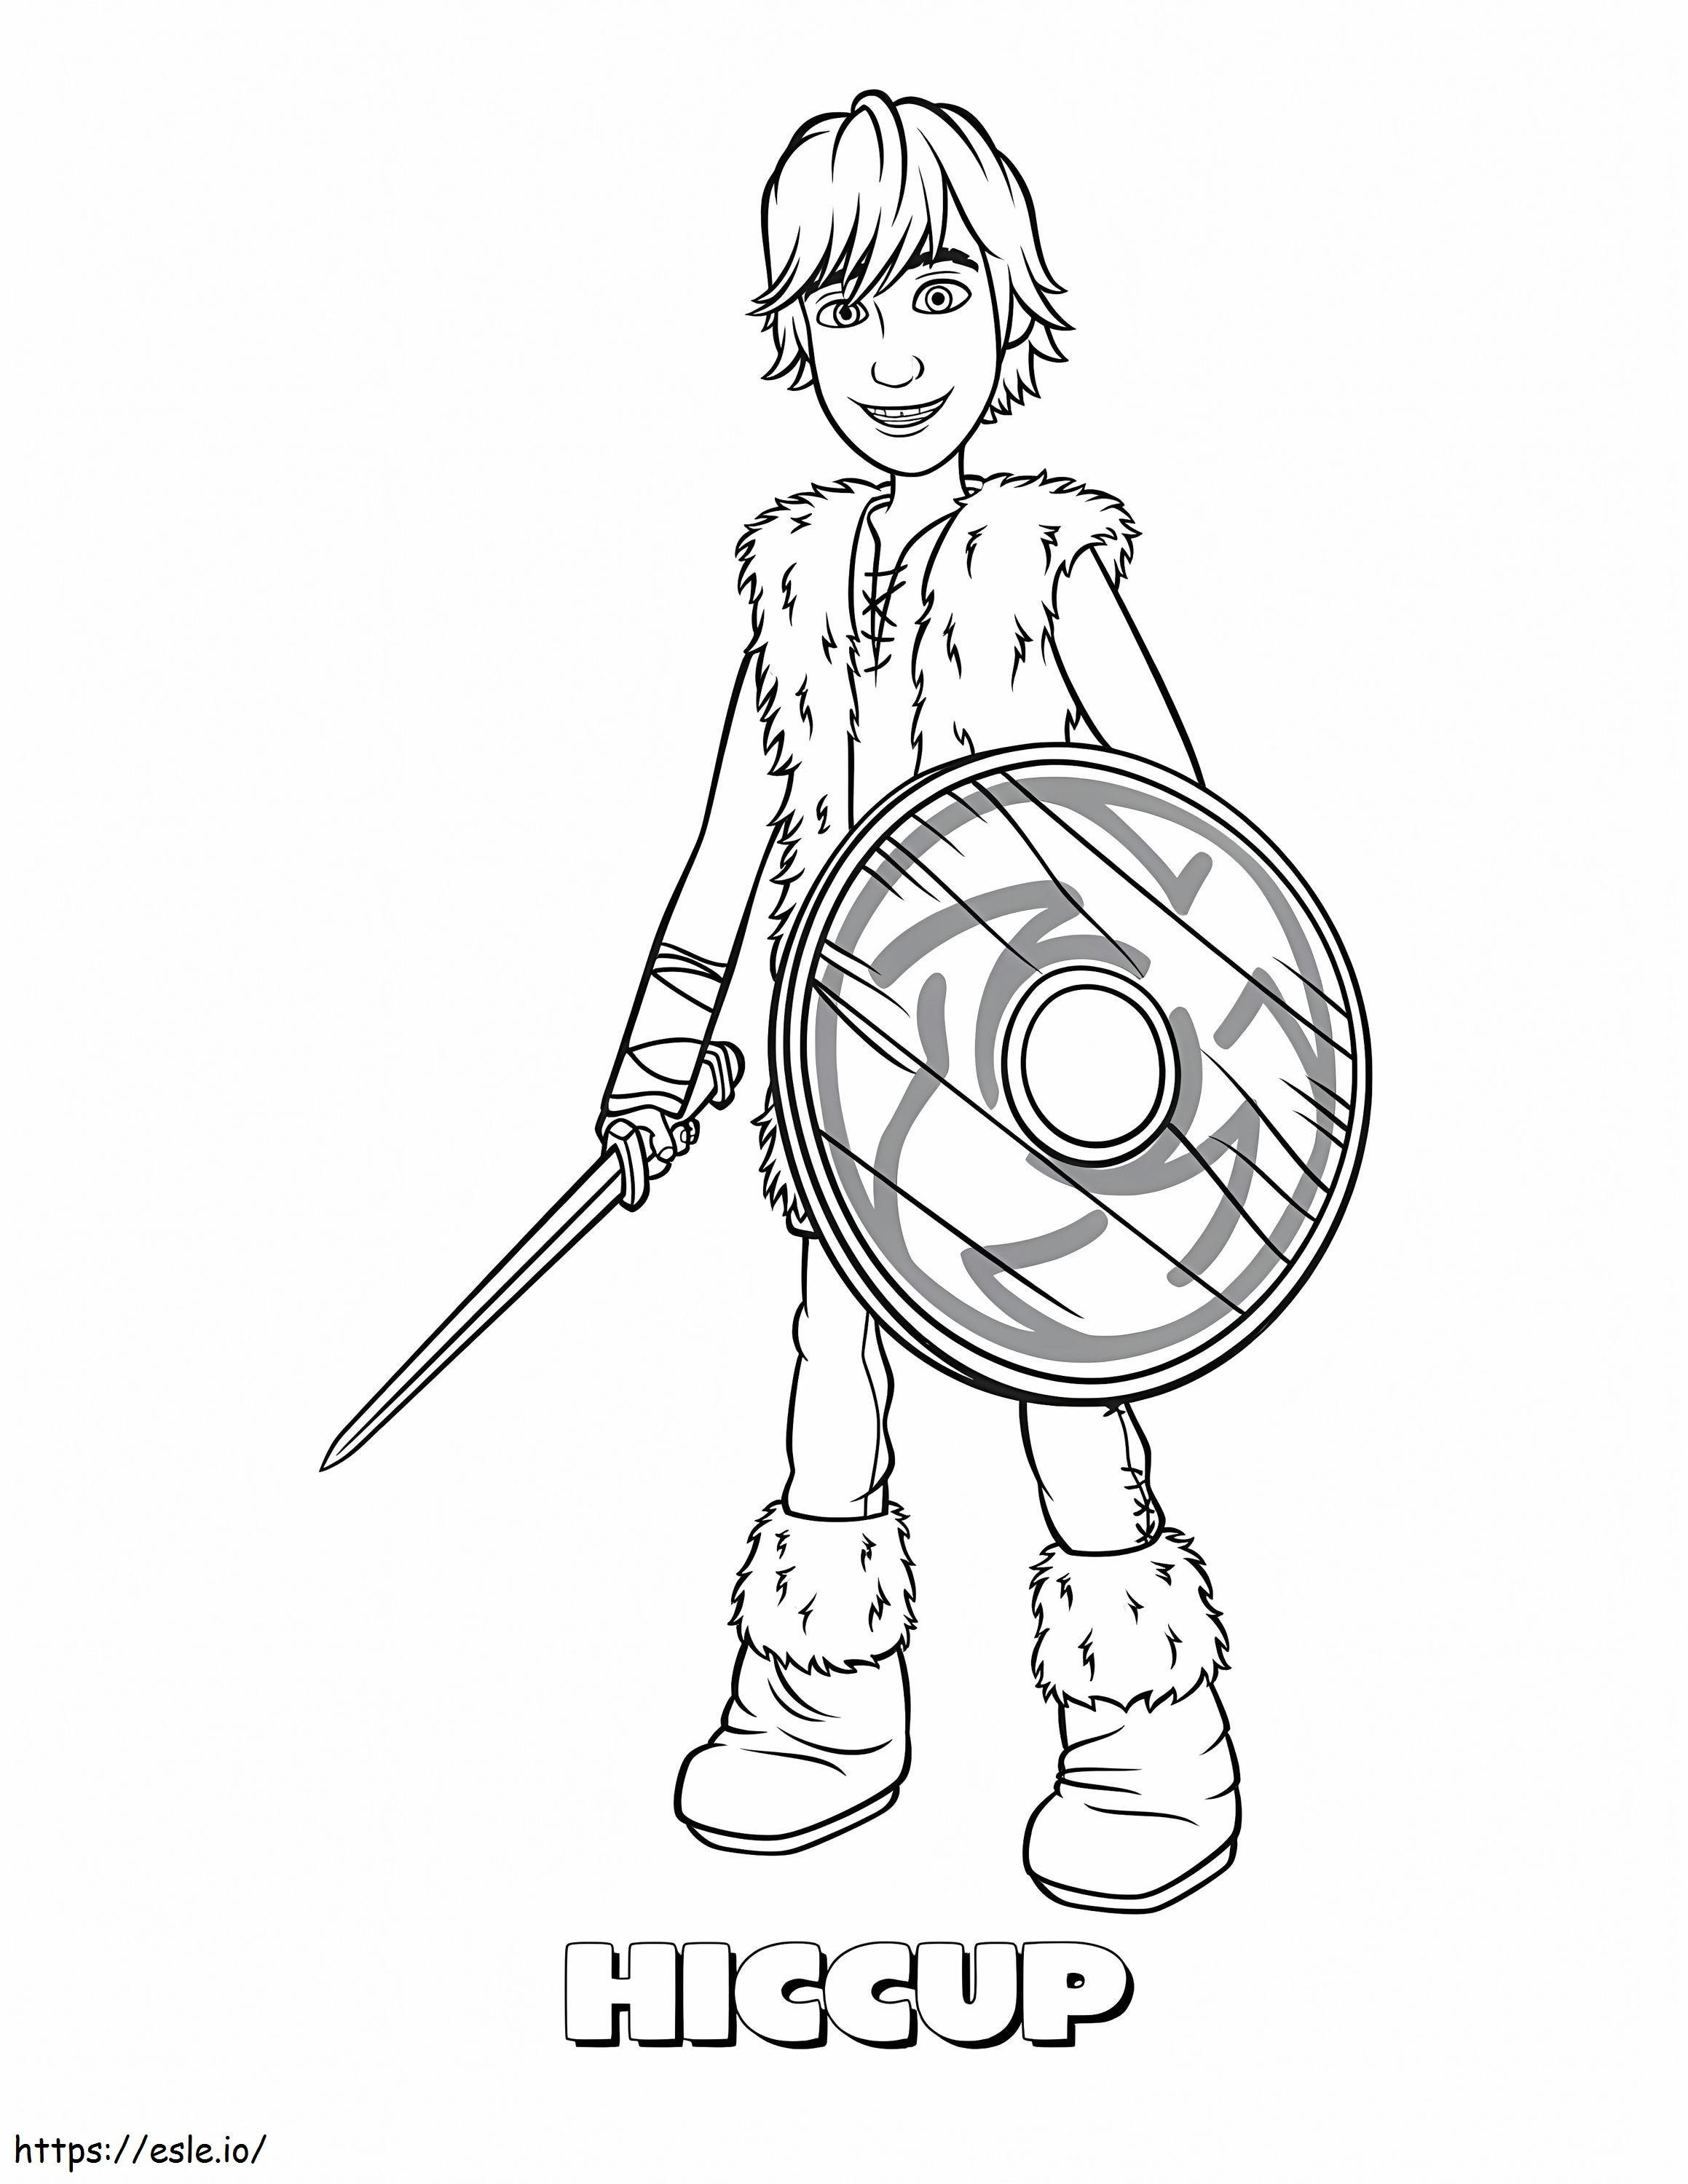 Hiccup Smiling coloring page